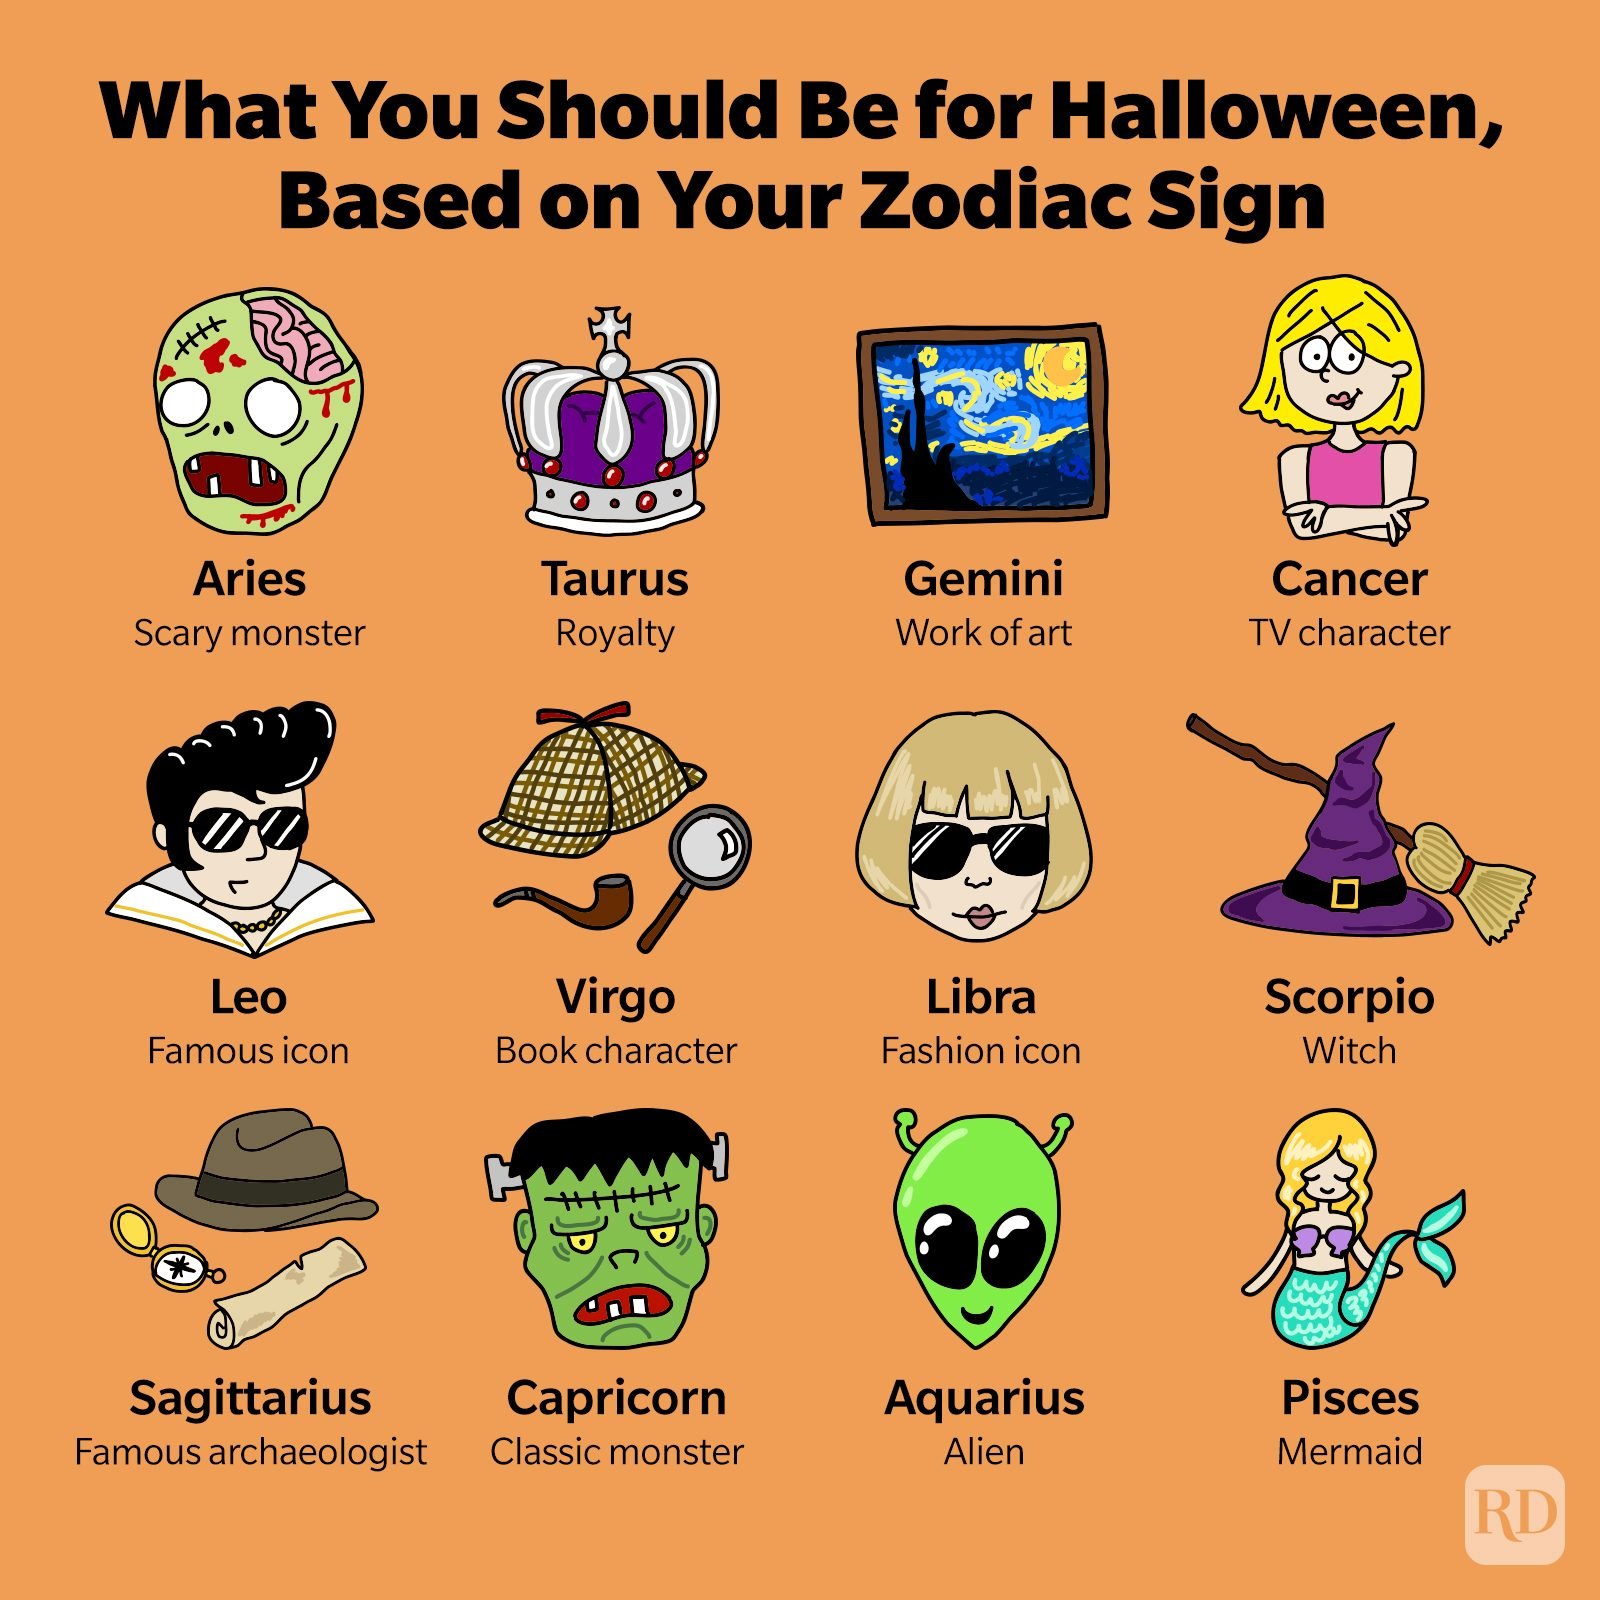 Halloween Zodiac Sign: the Best Costume for You Based on Your Sign